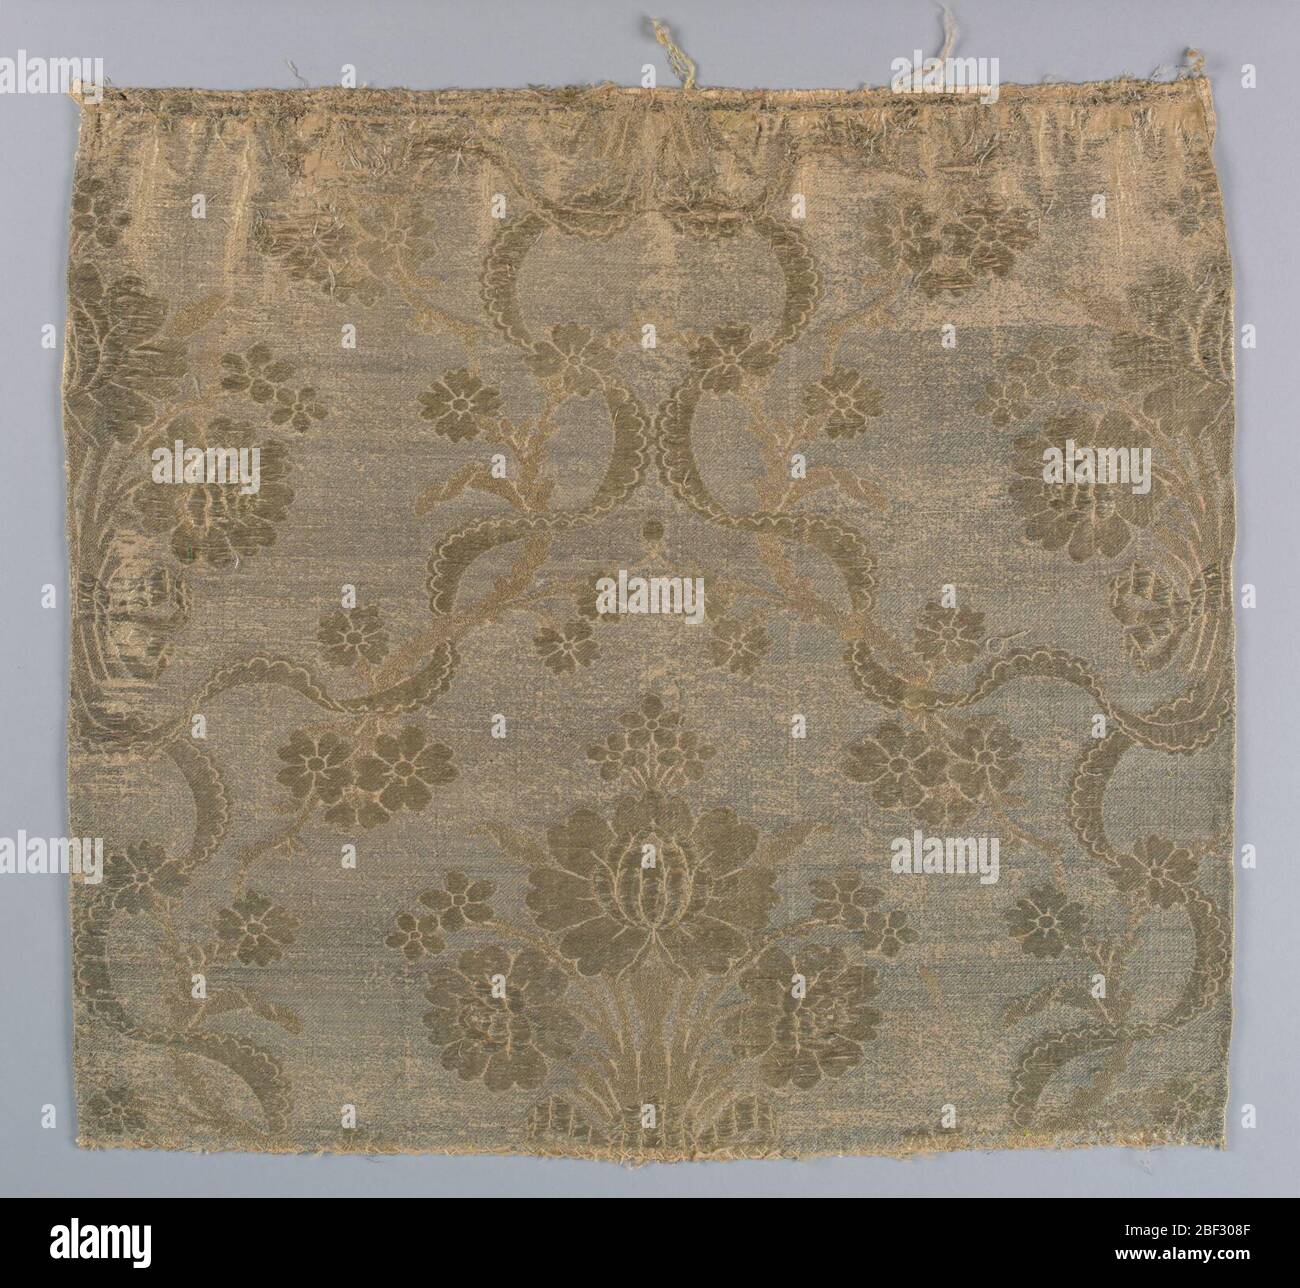 Fragment. Peach and metallic silver fabric in a design of a large-scale central spray of roses flanked by scalloped ribbon serpentines meeting in the center. Large roses in high relief. Metallic brocading in several kinds of gold thread. Stock Photo